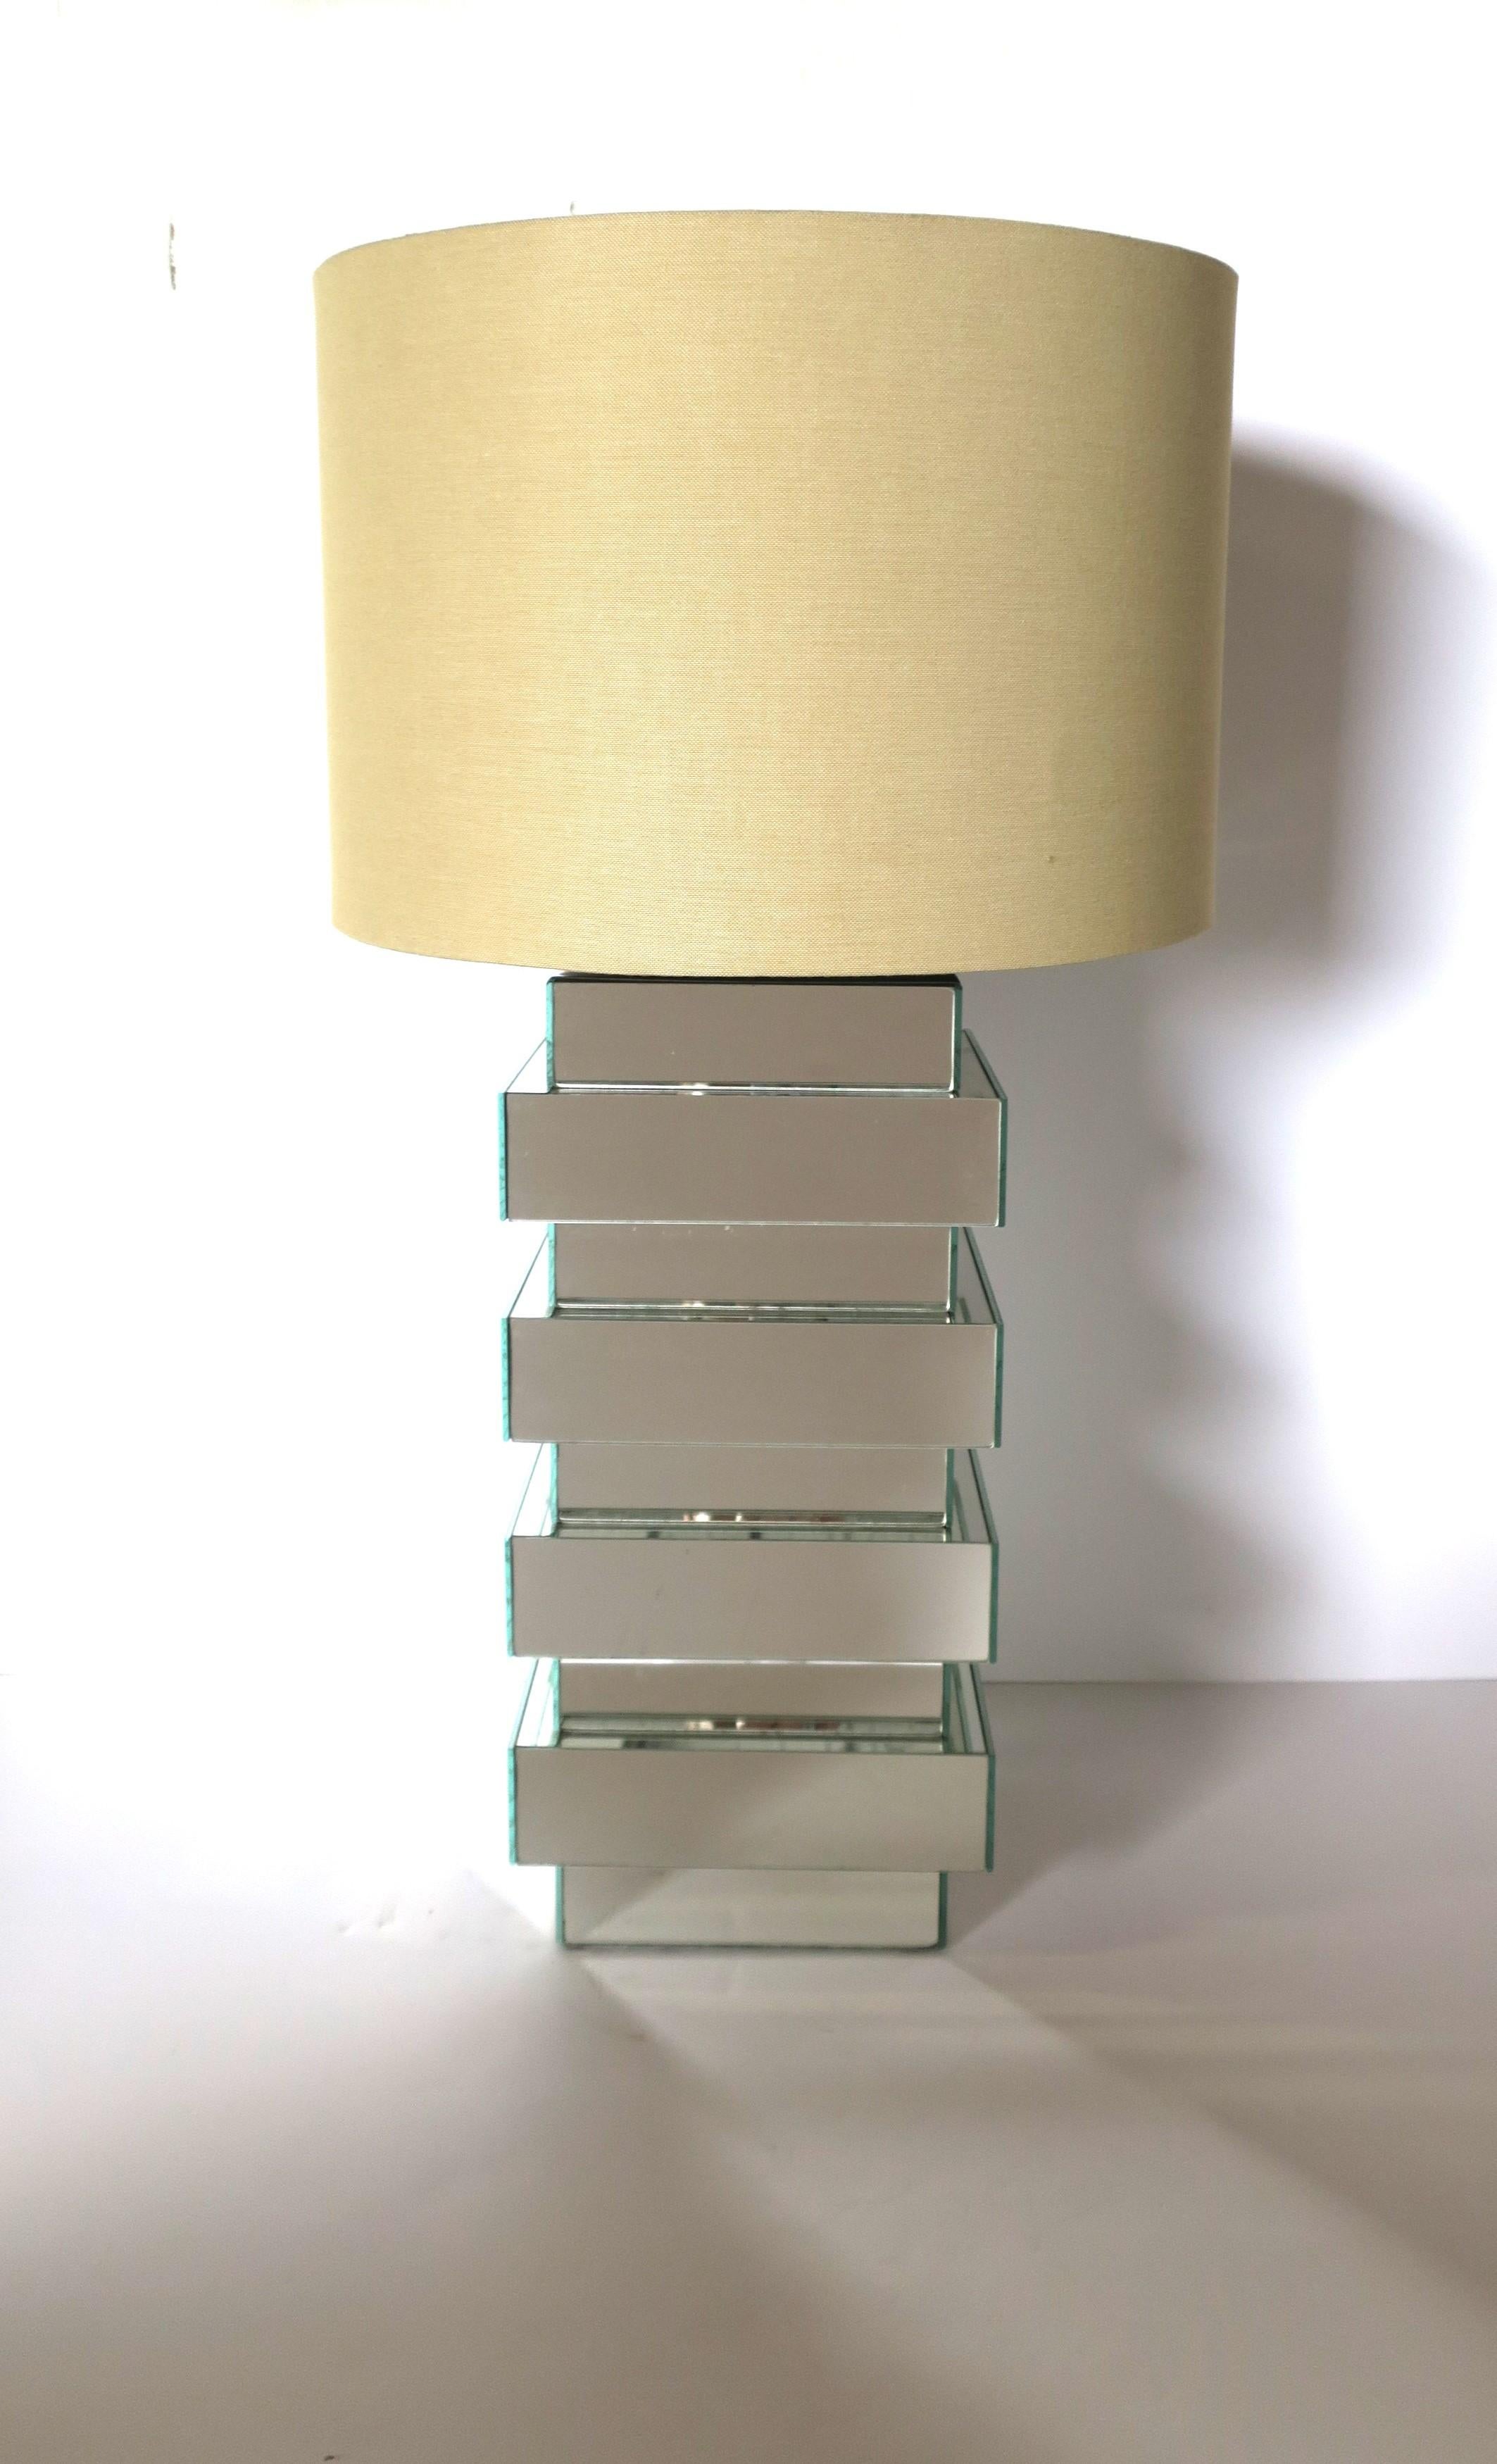 A substantial mirrored table lamp, in the Modern style, circa 1970s modern period. A beautiful well made all mirror table lamp, with chrome plate at top (just under socket, please see image #9.) In fine working order. 

Over all dimensions: 8.75